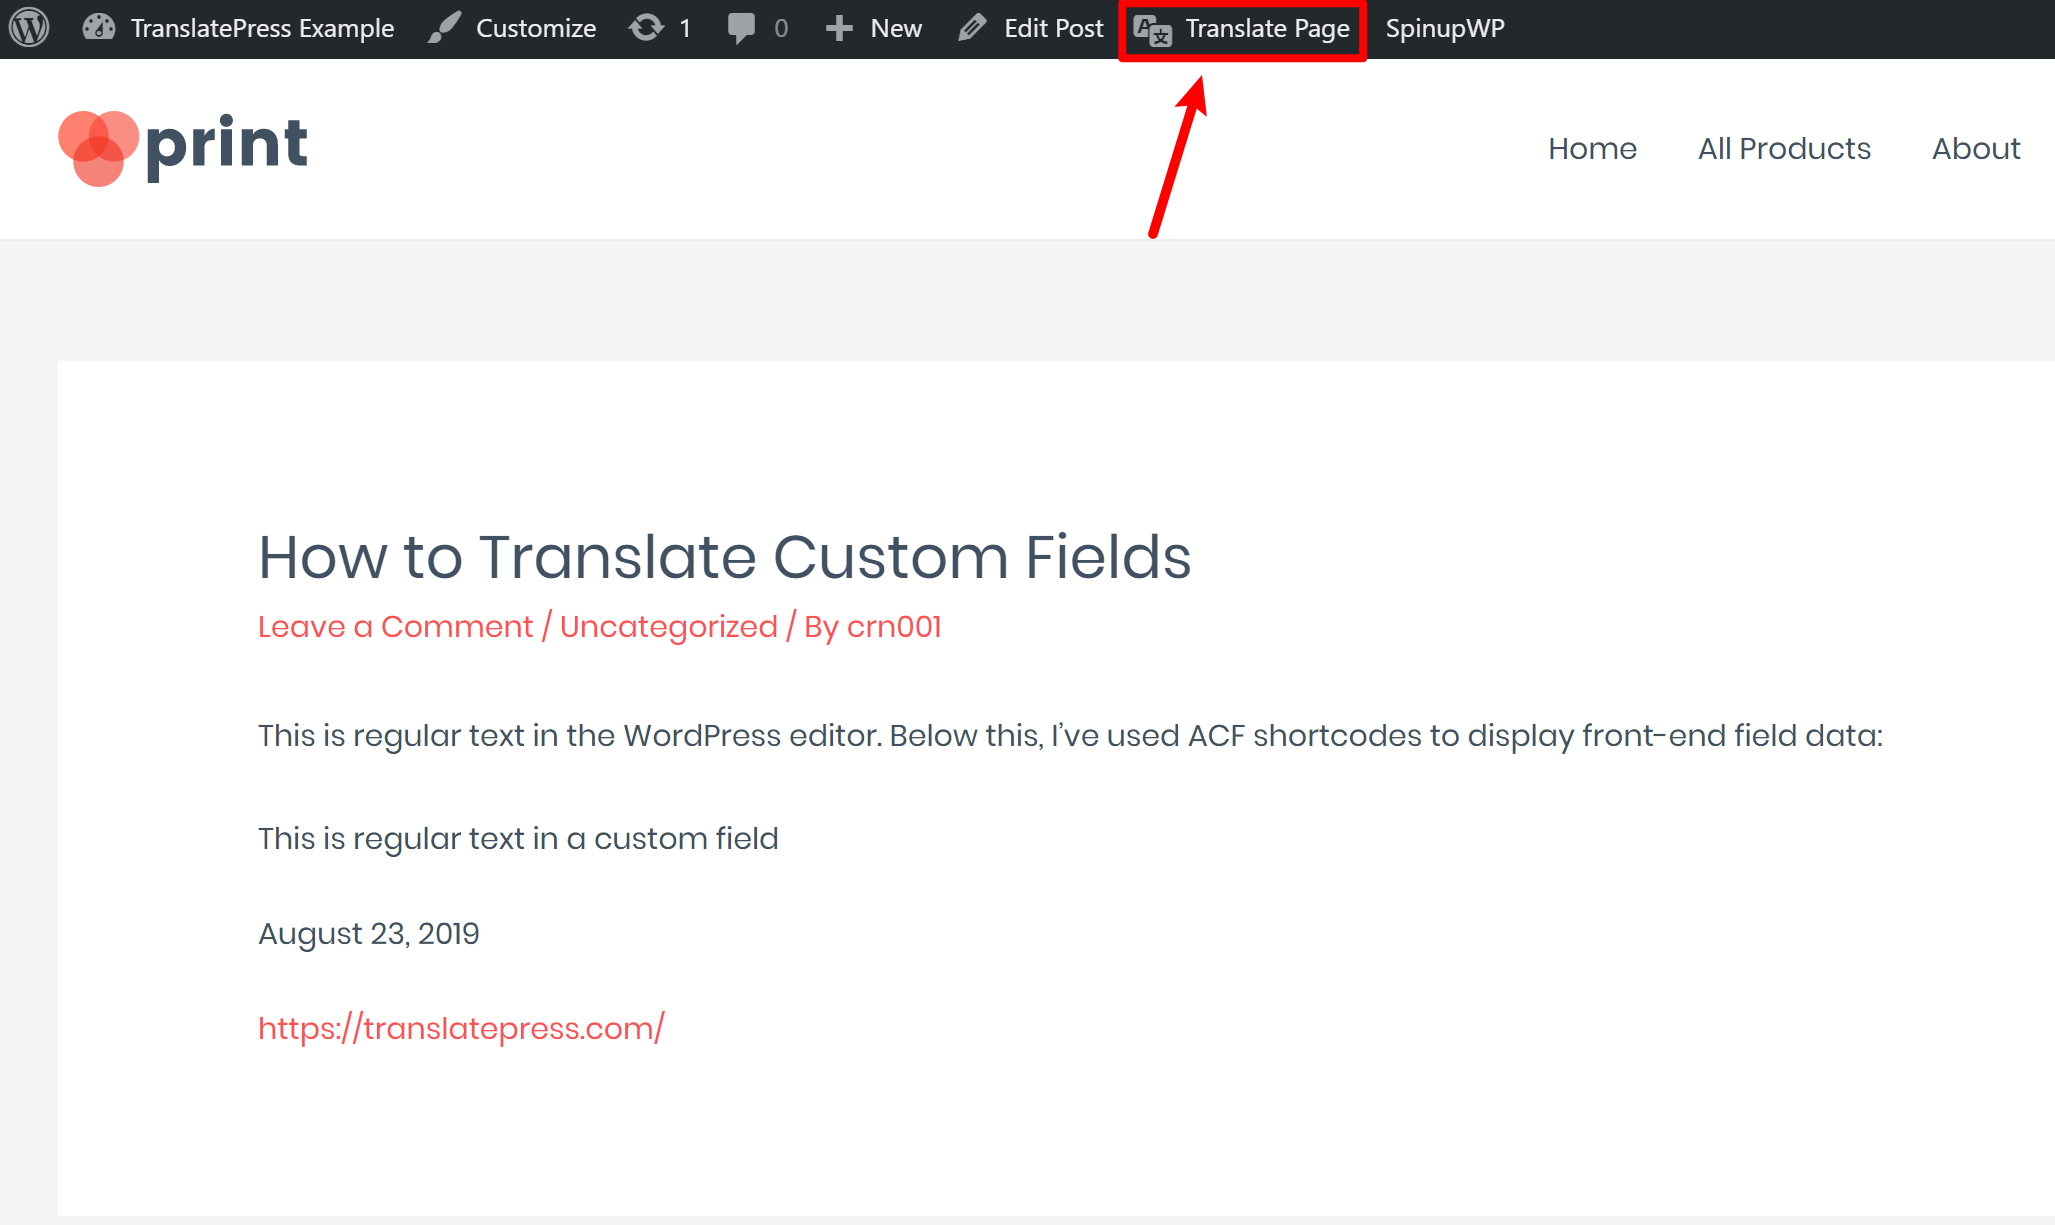 How to open translation editor for custom fields